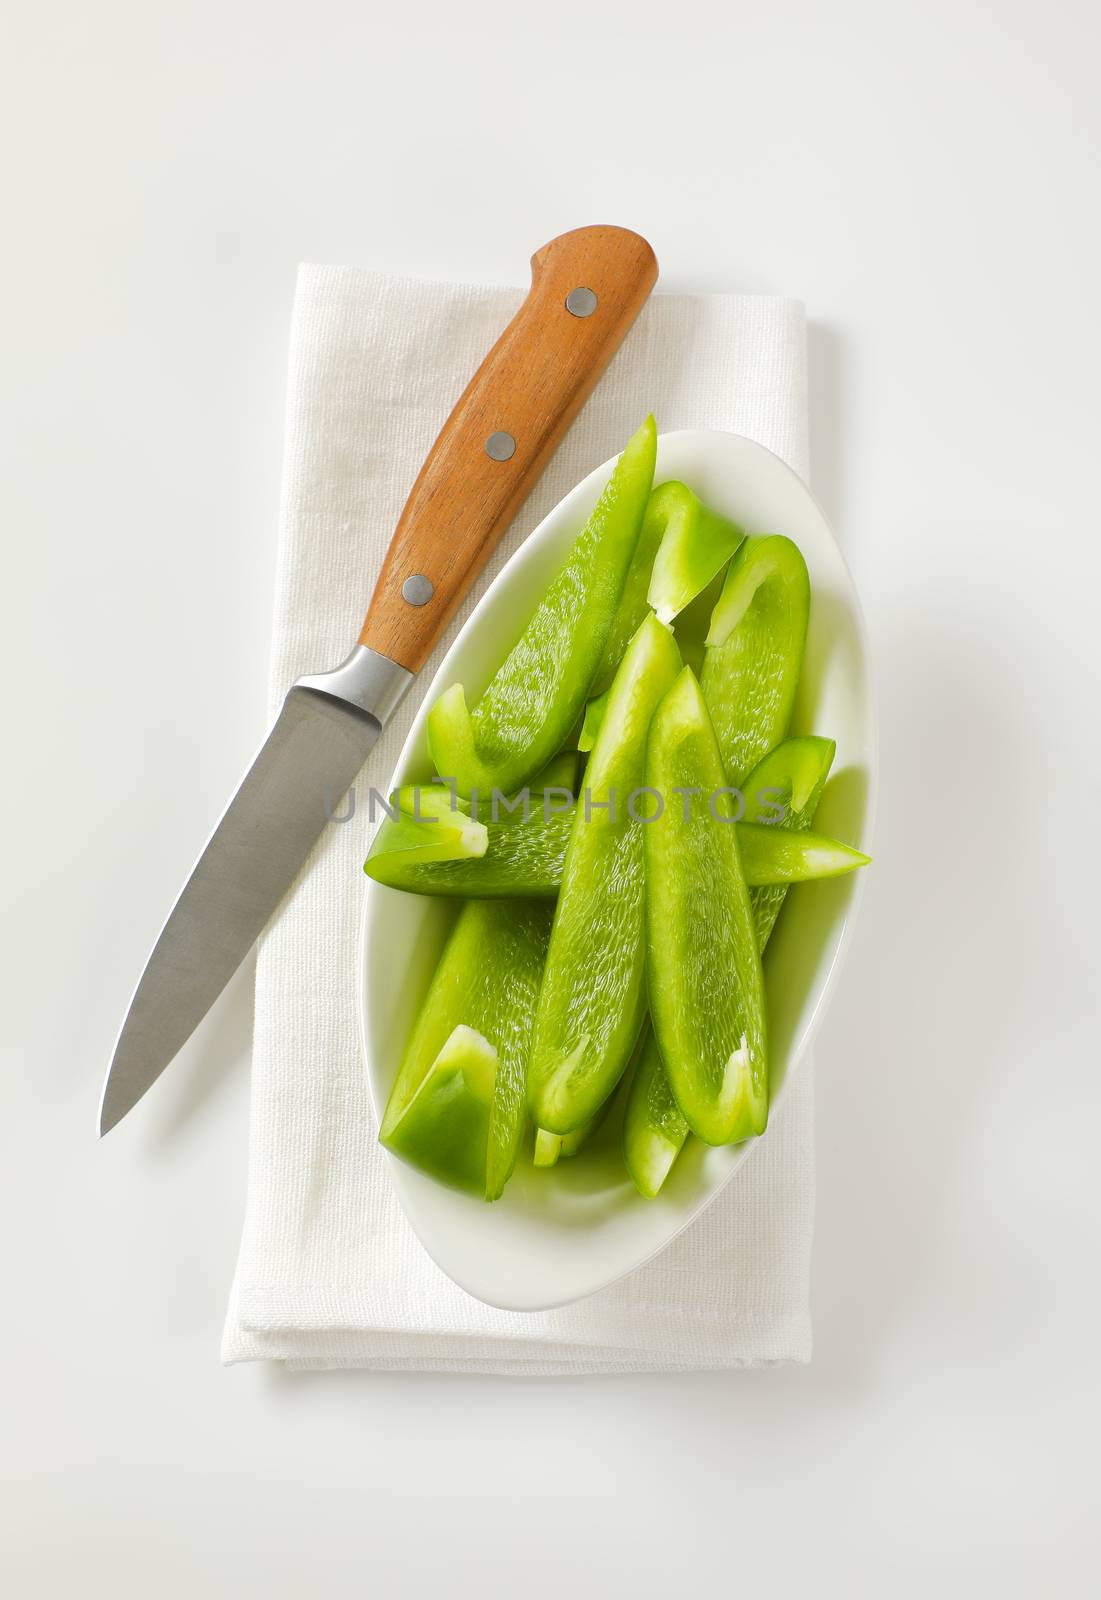 Green bell pepper slices in bowl by Digifoodstock